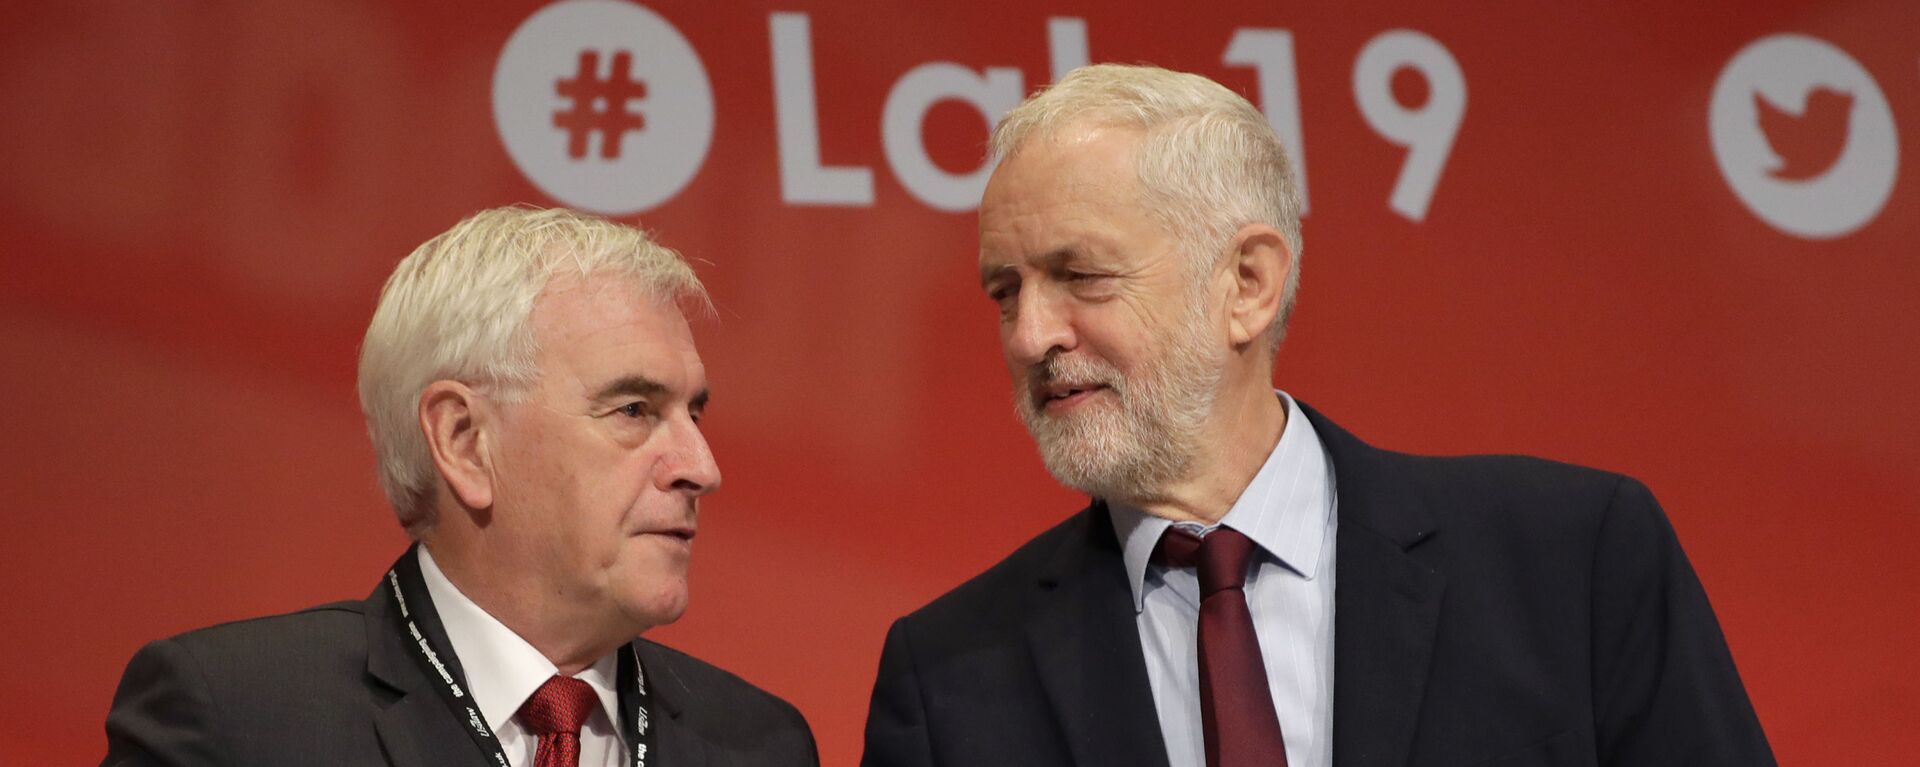 Jeremy Corbyn, leader of Britain's opposition Labour Party, right, and John McDonnell Shadow Chancellor on stage during the Labour Party Conference at the Brighton Centre , Tuesday, Sept. 24, 2019. - Sputnik International, 1920, 21.07.2021